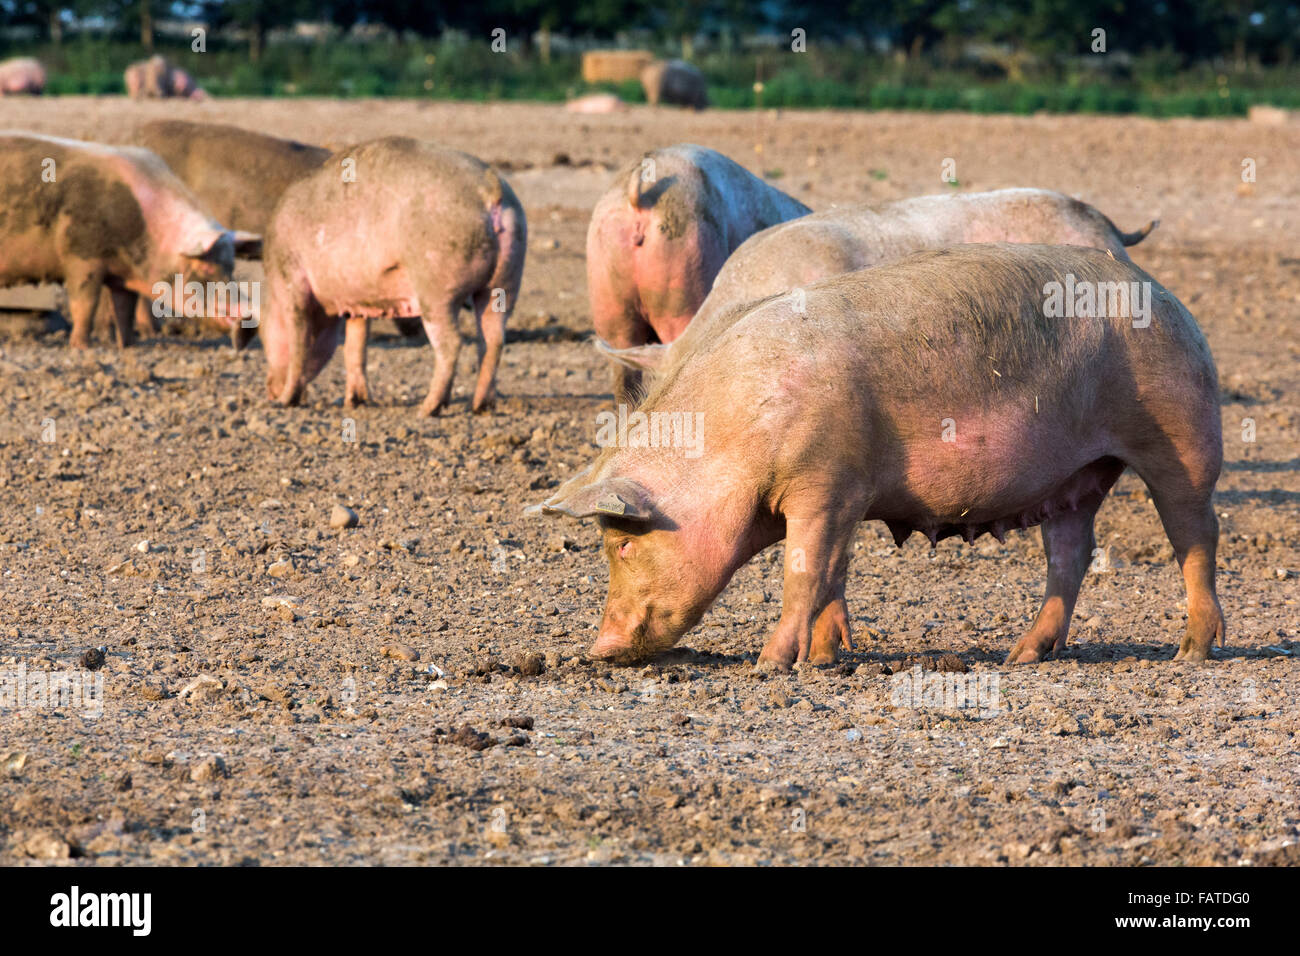 sow pigs in field Stock Photo